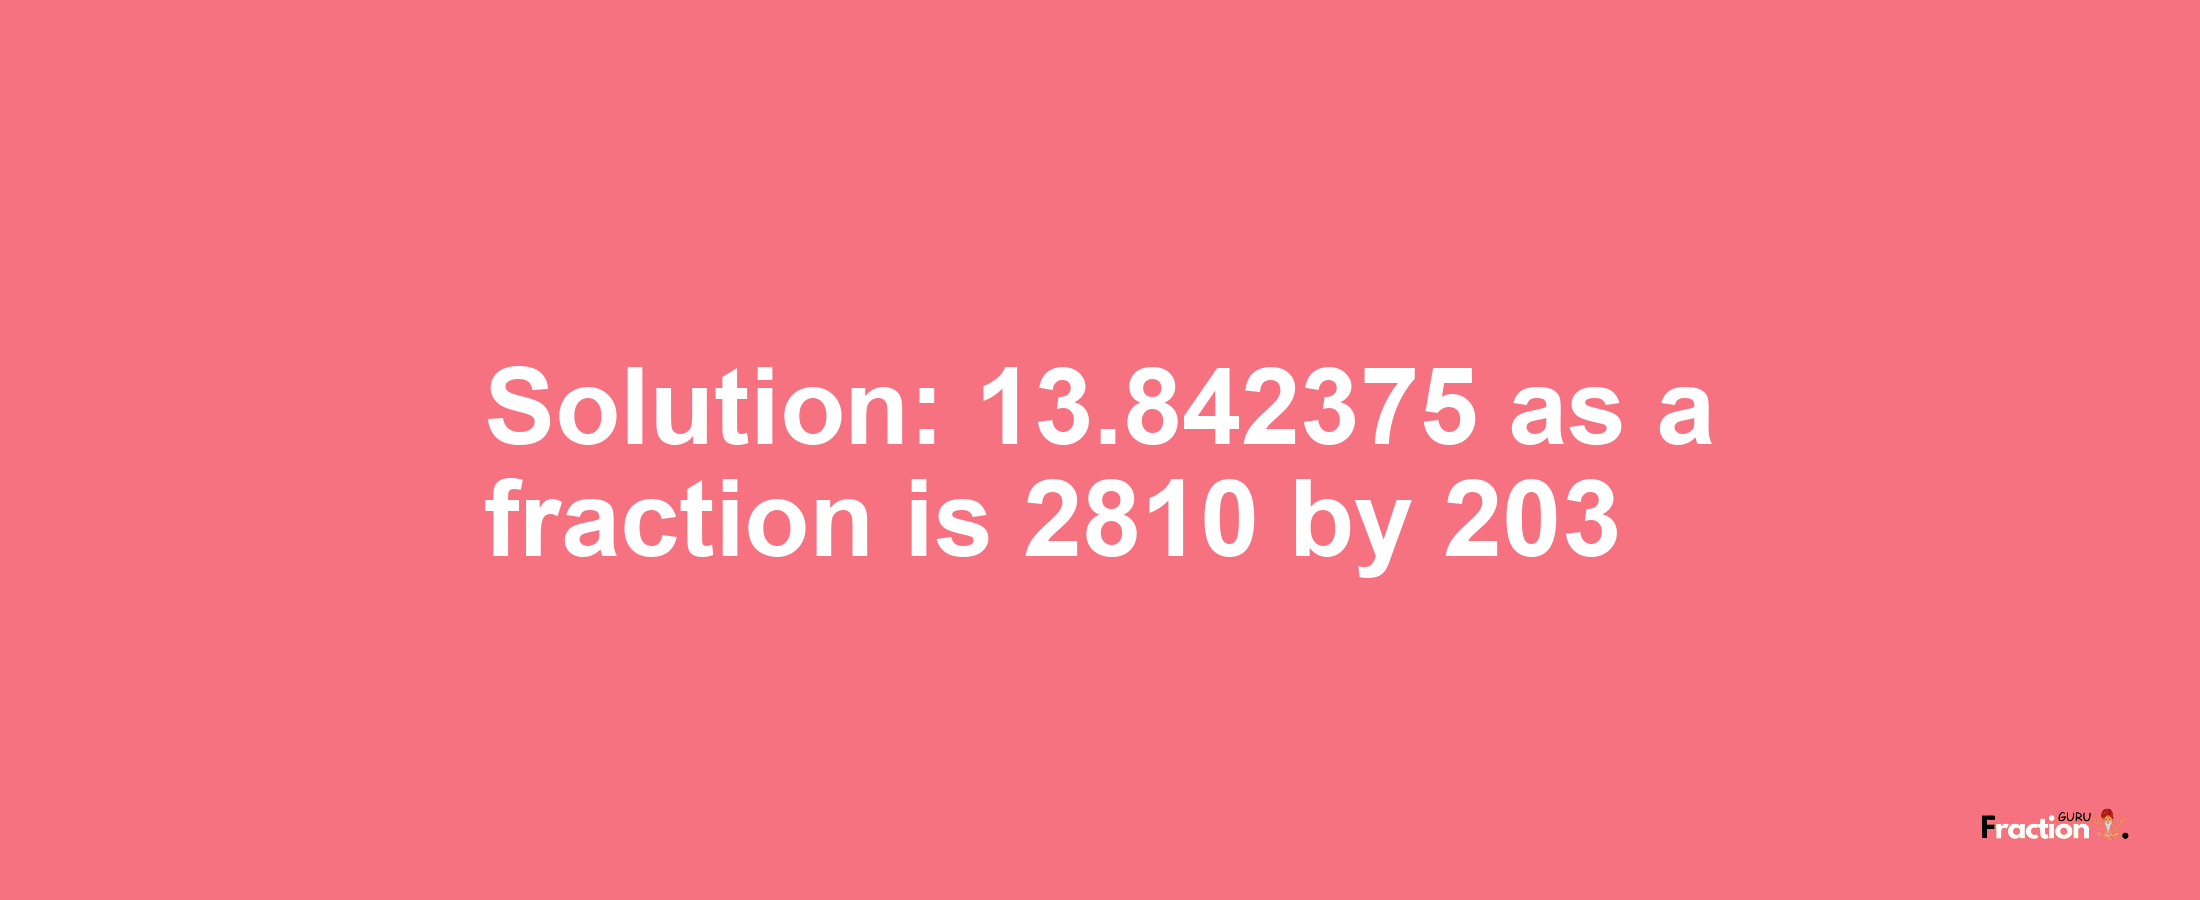 Solution:13.842375 as a fraction is 2810/203